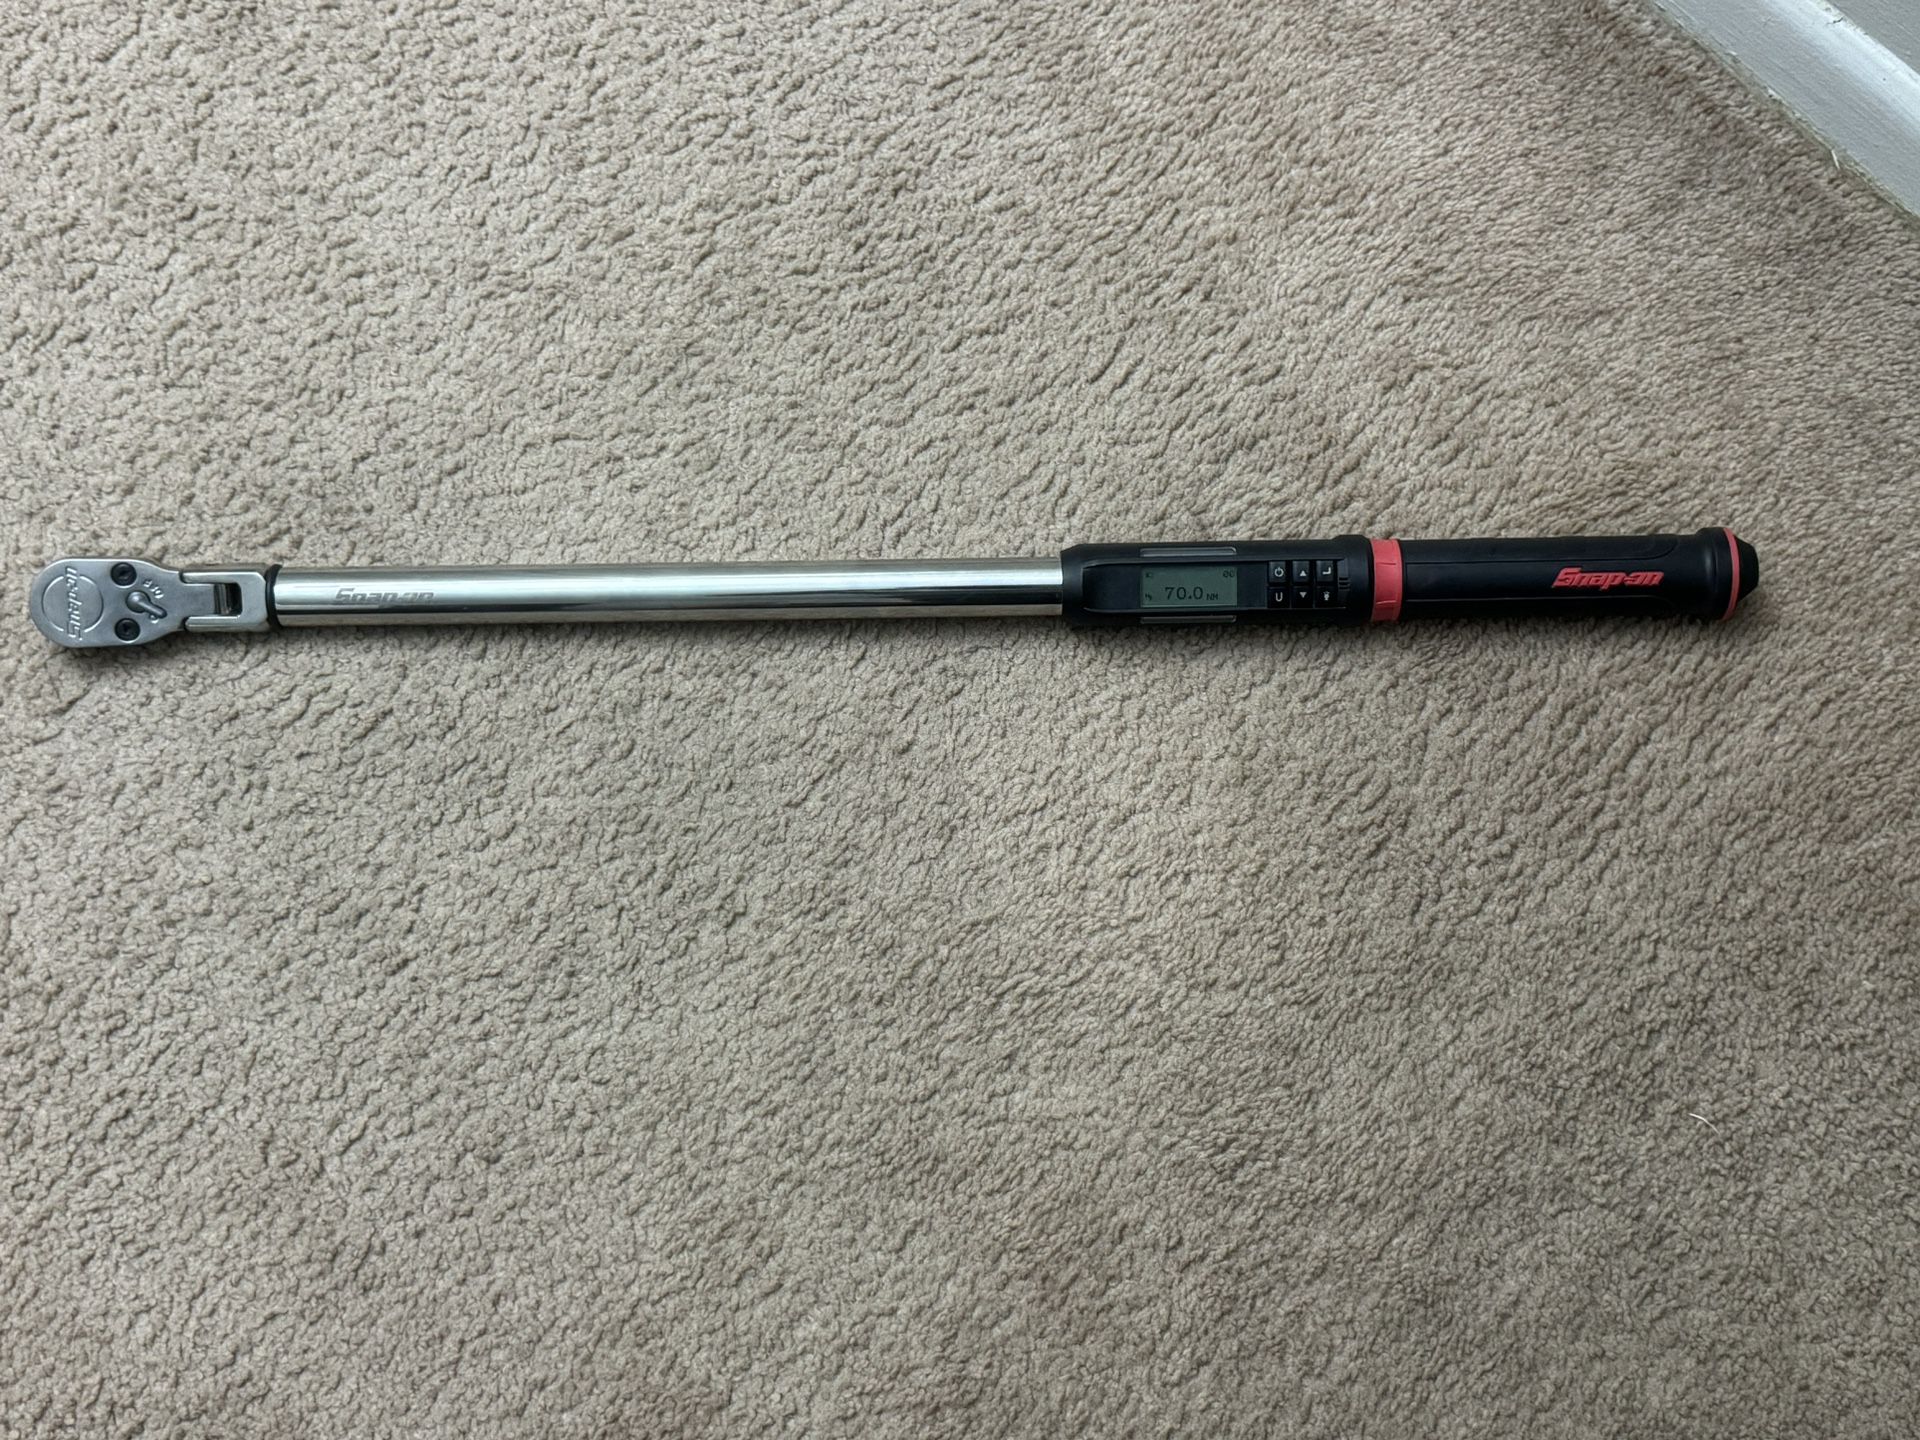 SNAP ON 1/2" Drive TechAngle Torque Wrench $380